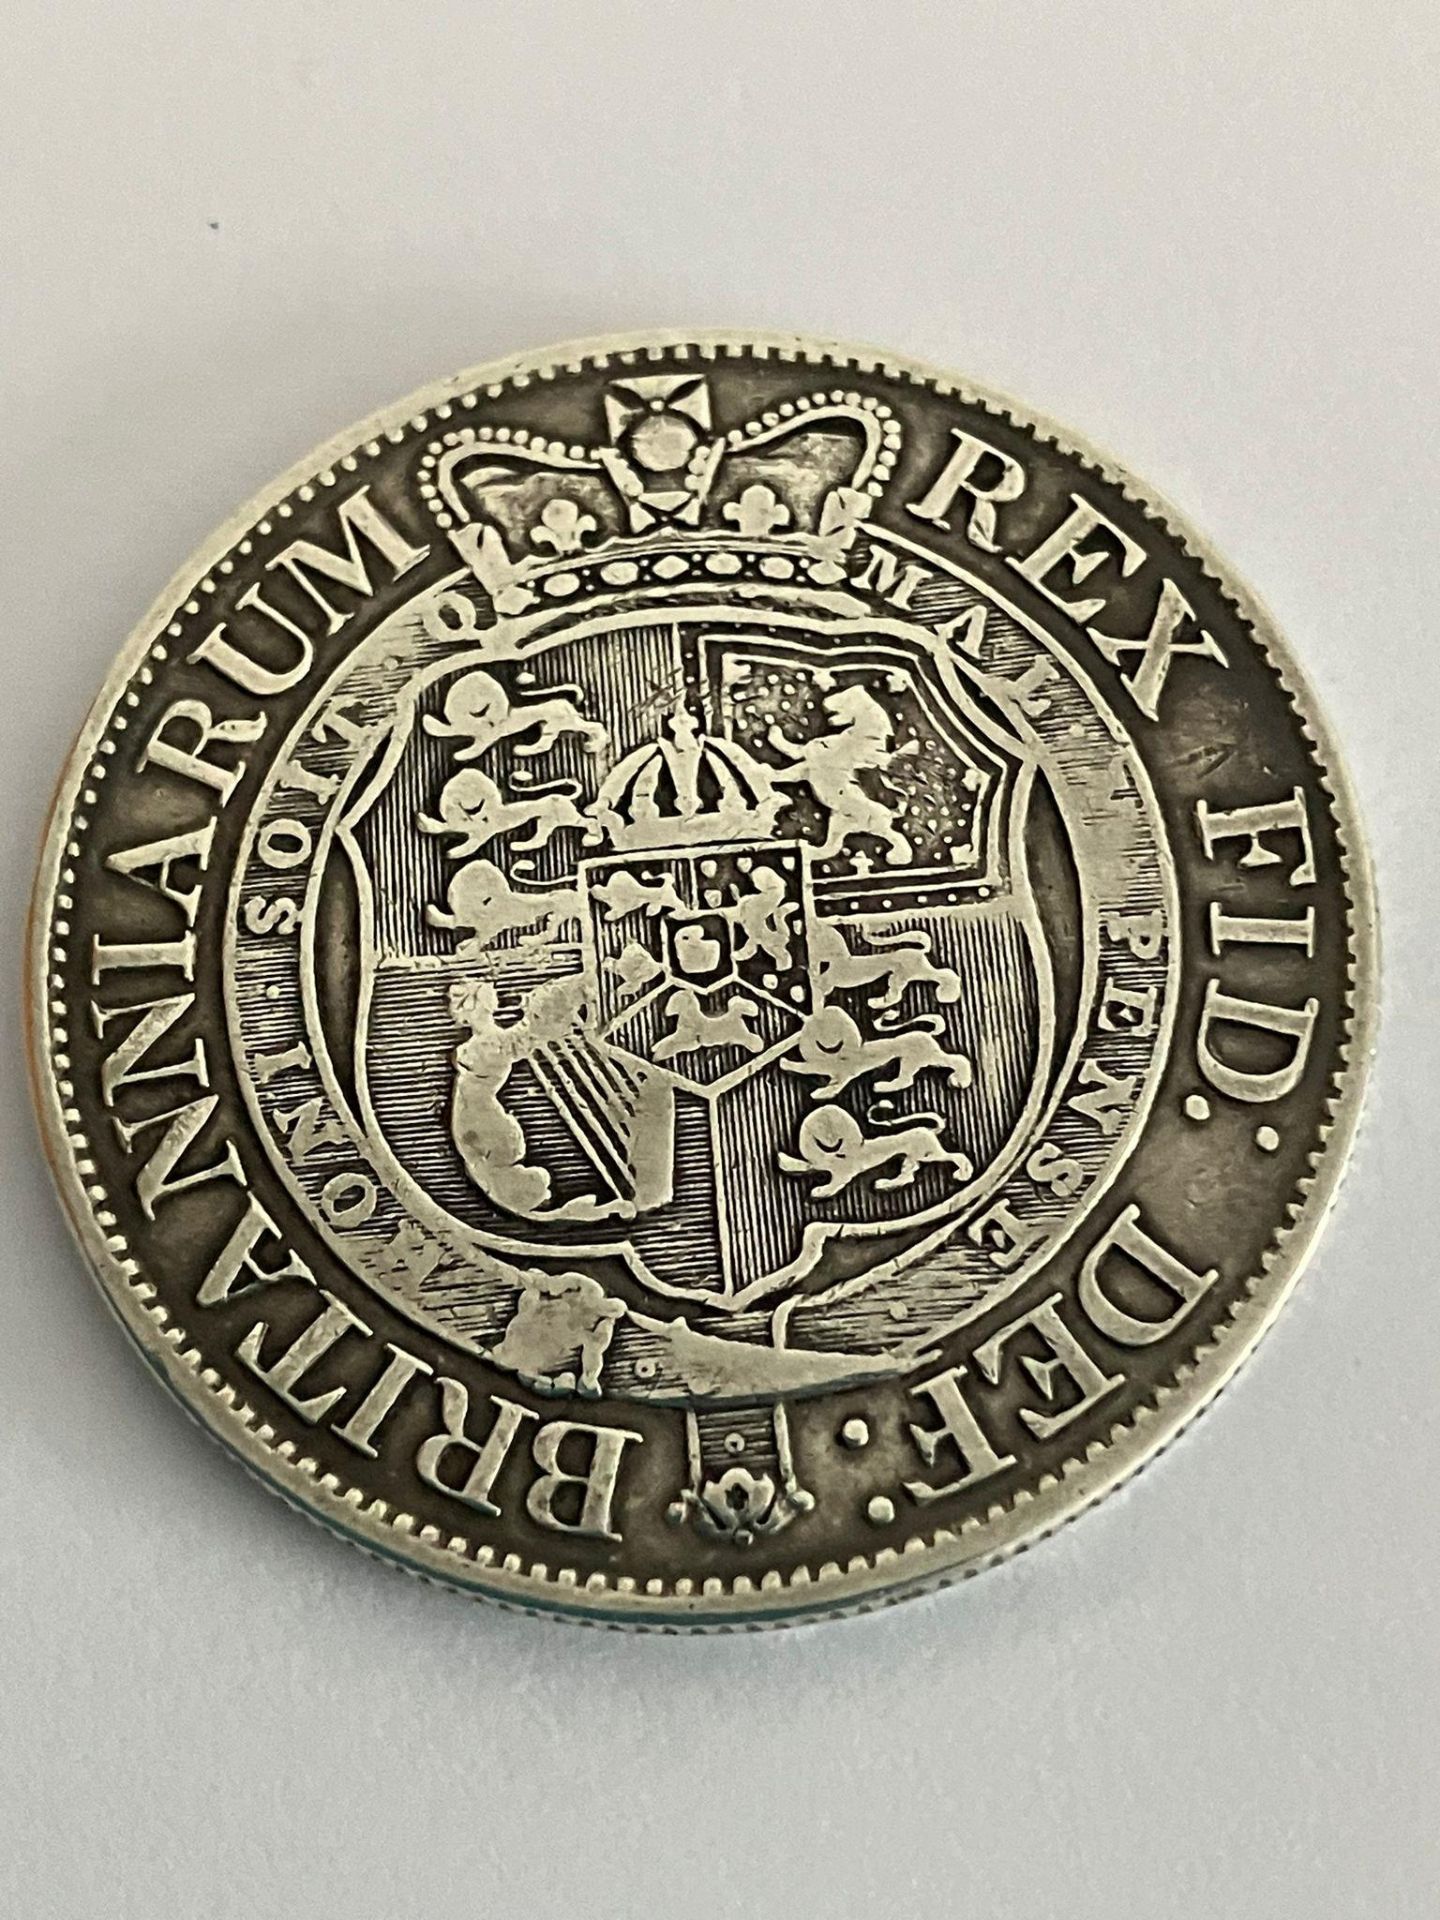 1819 GEORGE III SILVER HALF CROWN. Very fine/extra fine Condition. Having clear detail to both